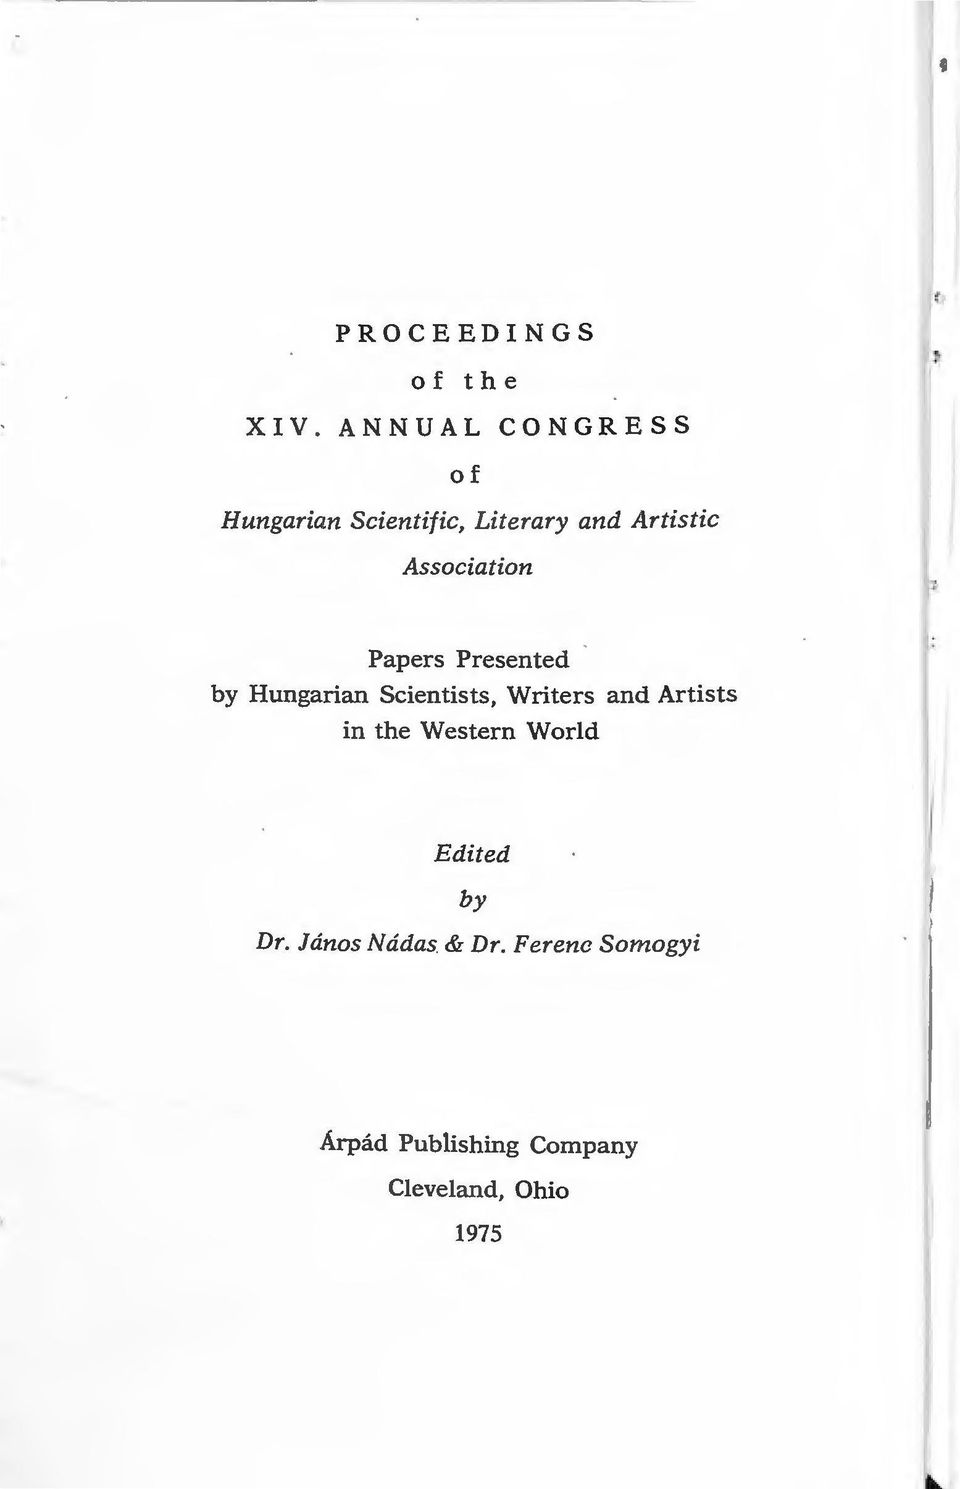 Association Papers Presented by Hungarian Scientists, Writers and